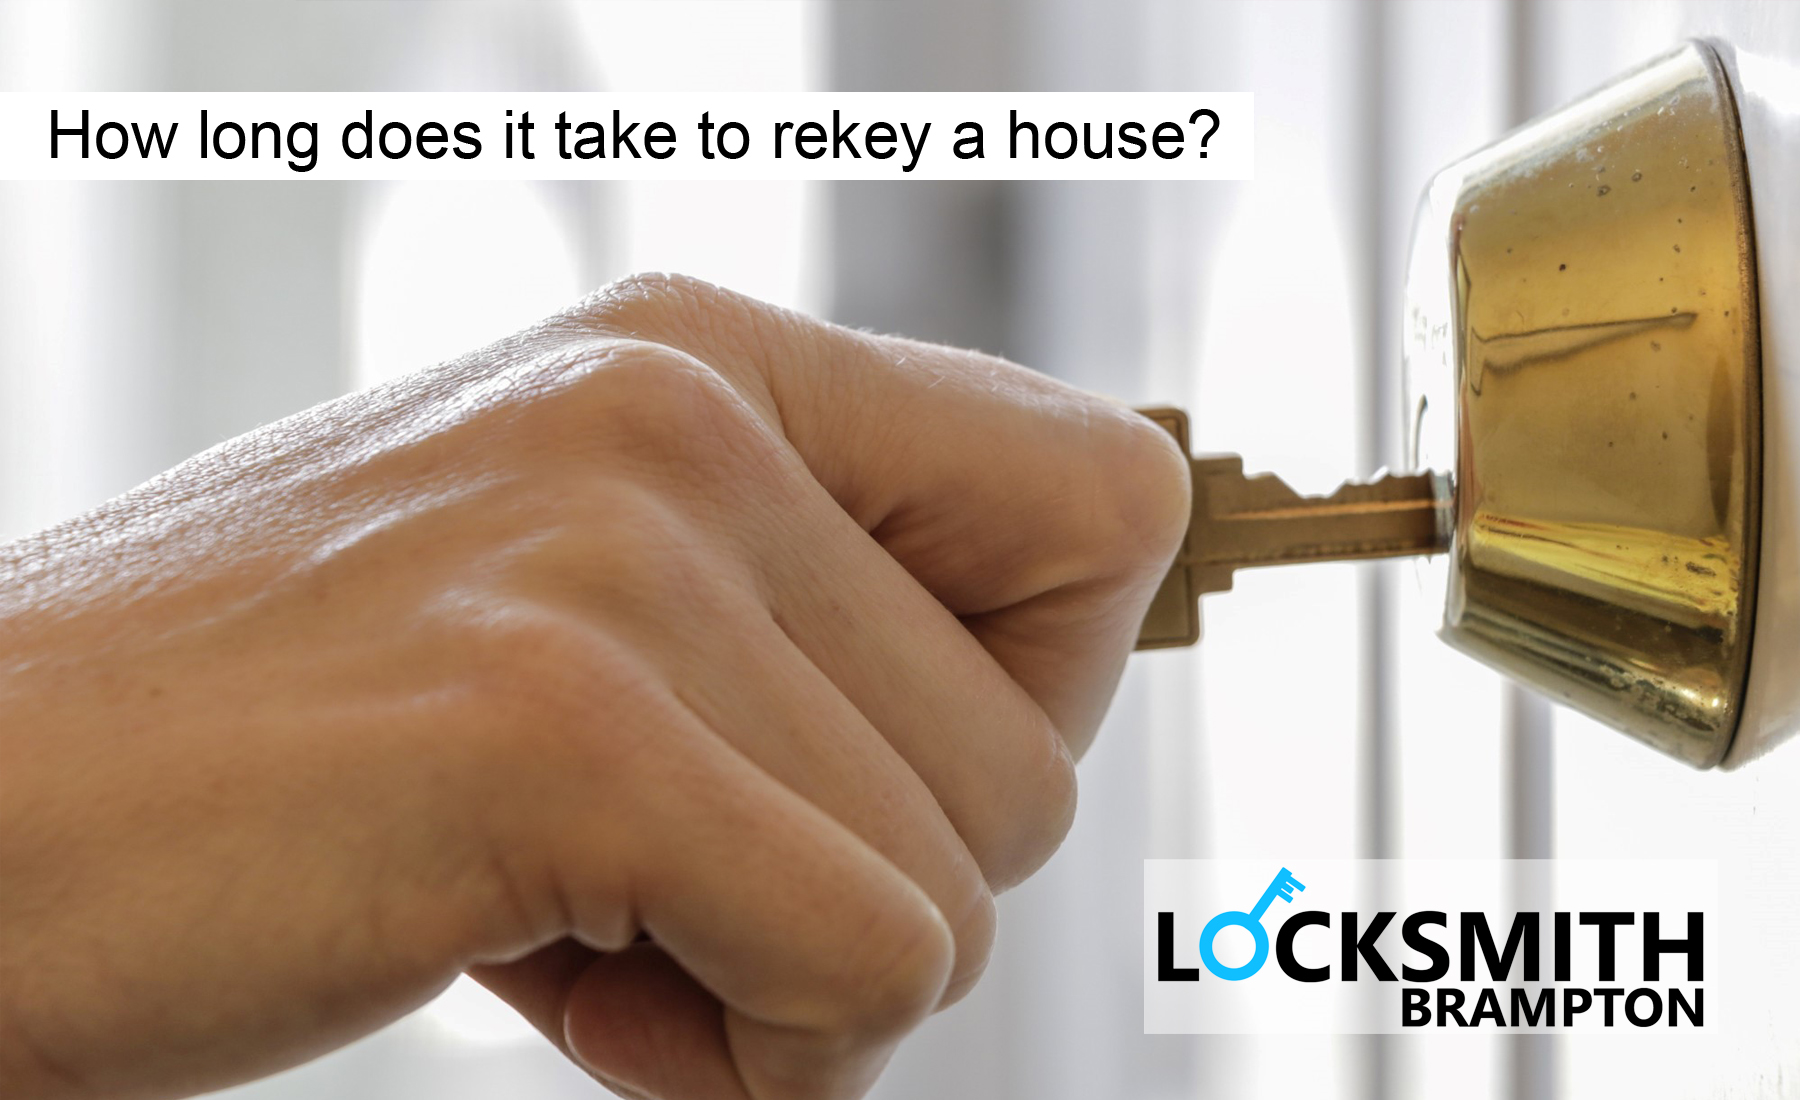 How long does it take to rekey a house?